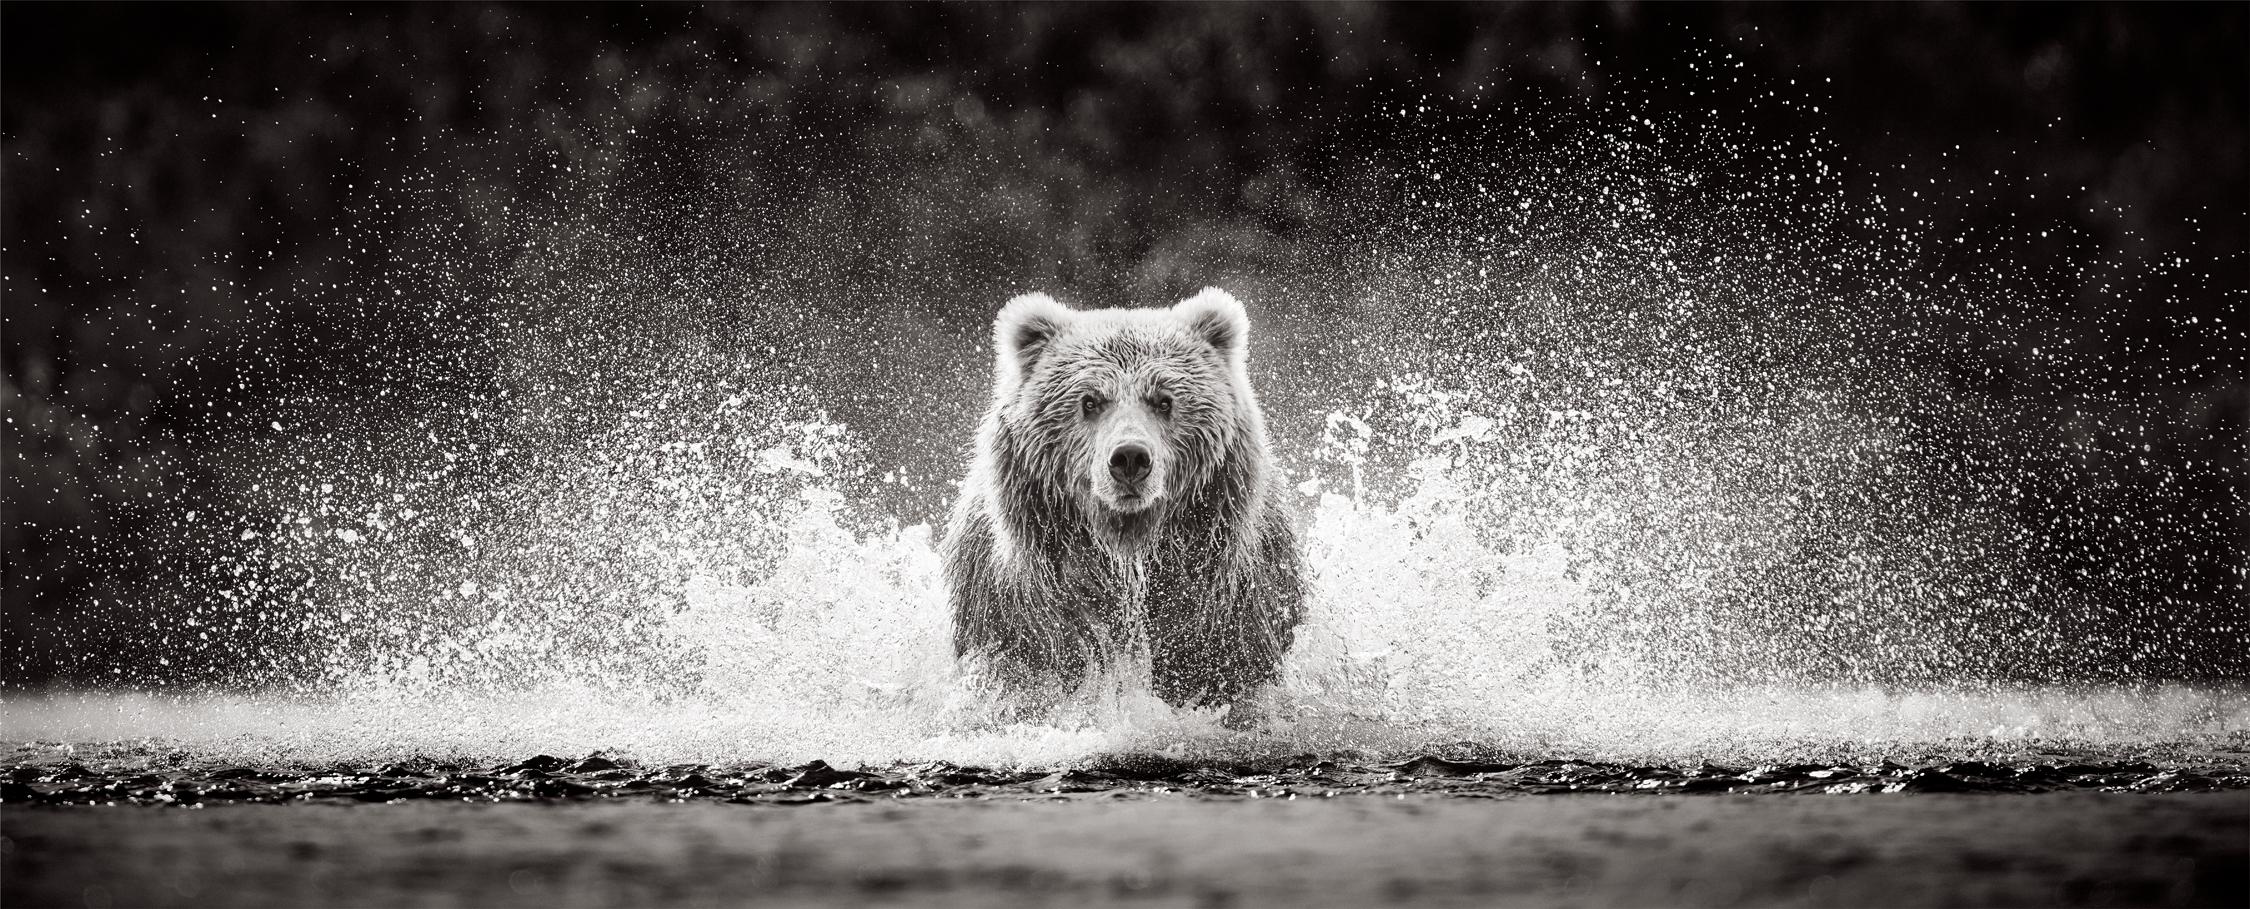 Drew Doggett Black and White Photograph - Brown Bear Racing Towards The Camera In The Creek